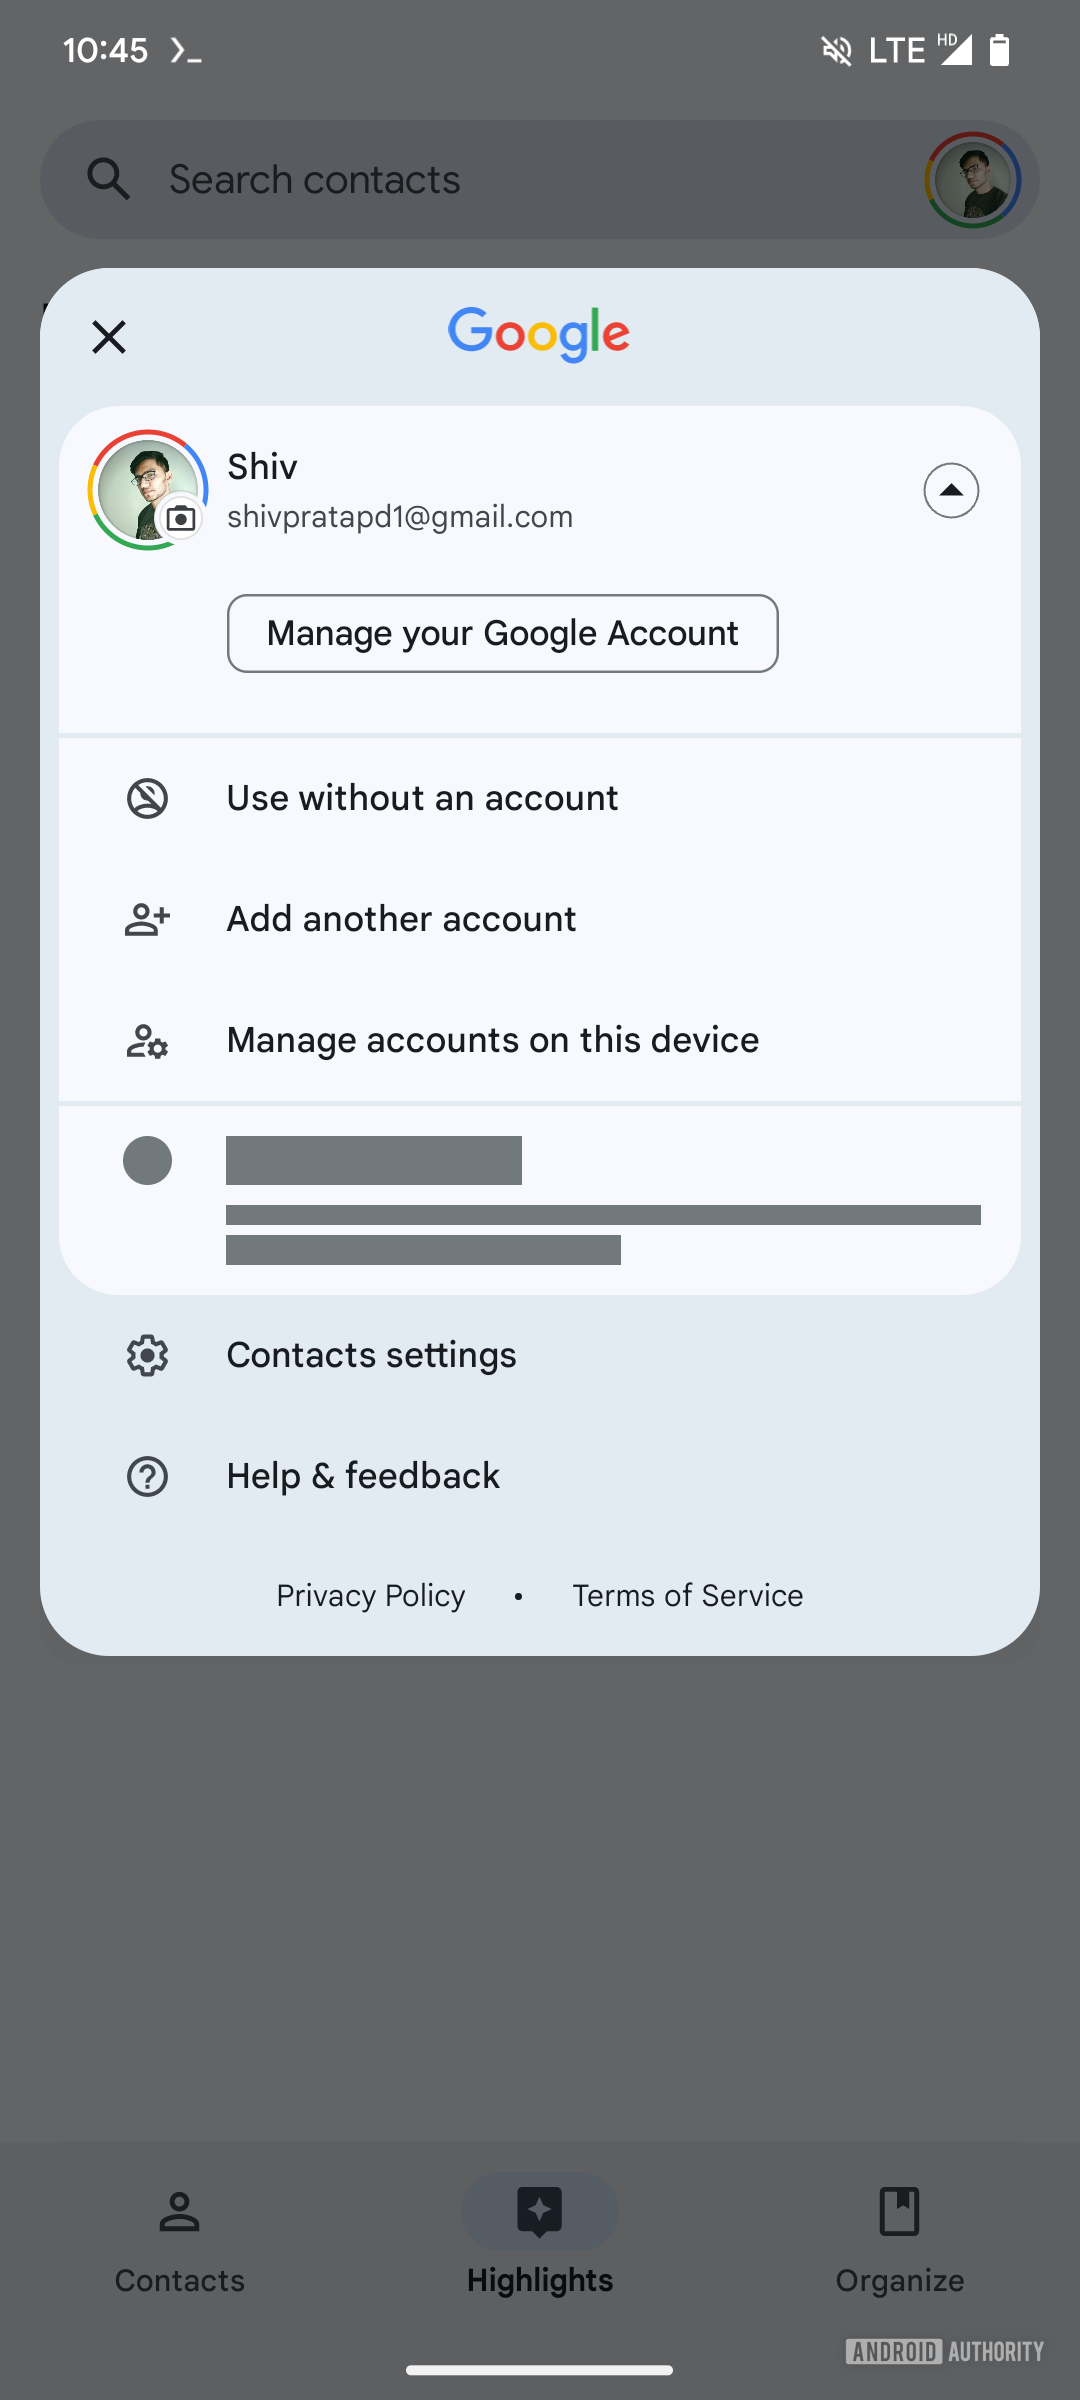 Screenshot of the Google Contacts app showing a new USe without an account option.